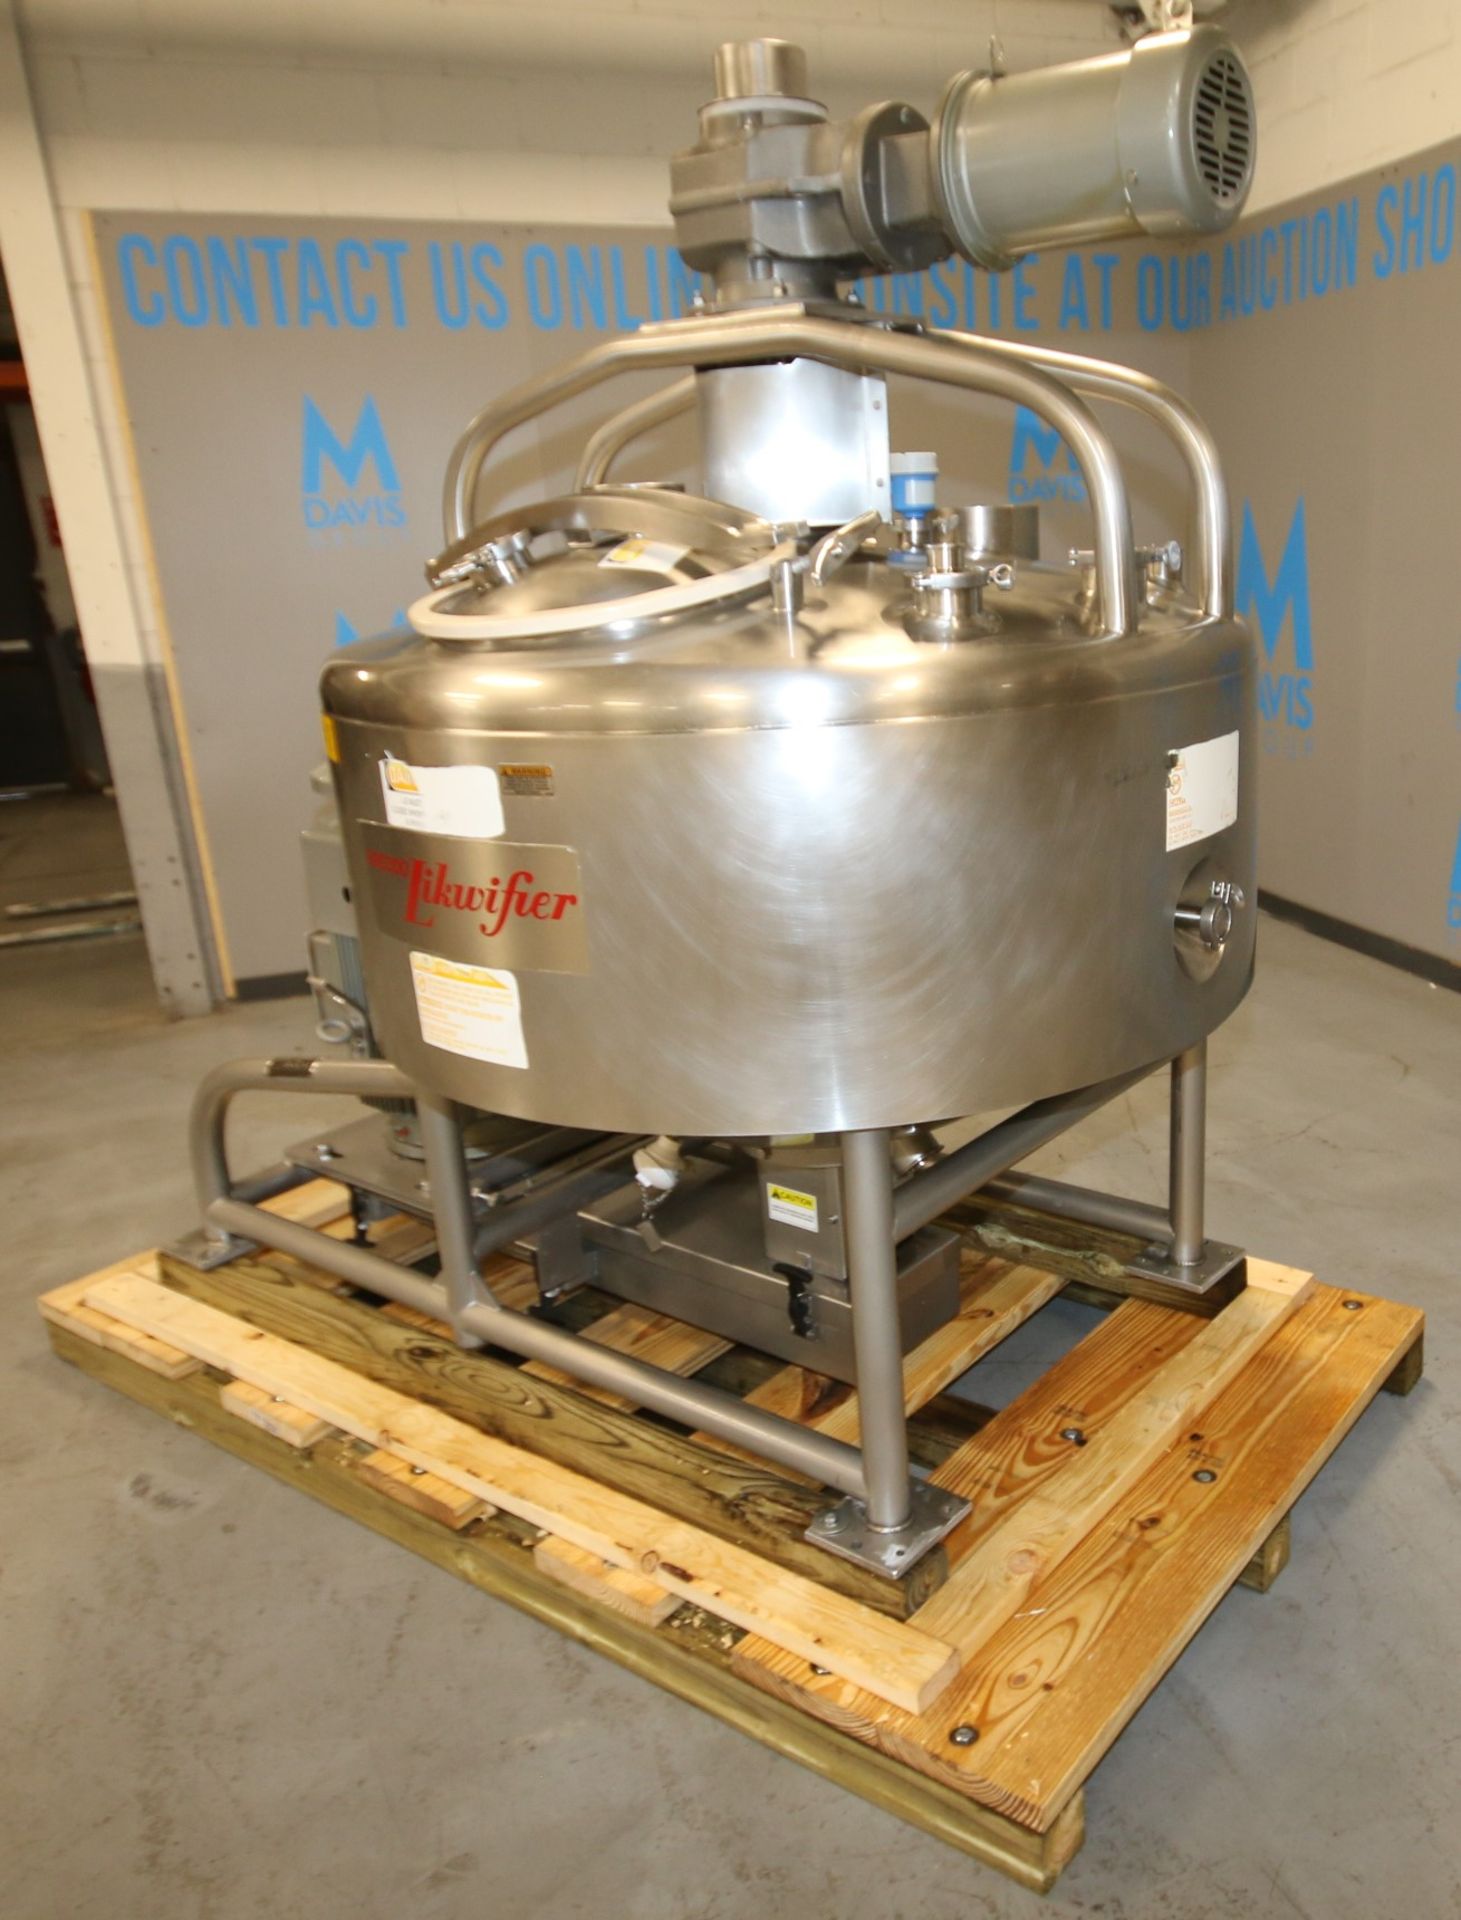 Breddo 100 Gal. Jacketed S/S Liquifier, Model LORWWSSD, SN D-582104 14133, with Off-Set Motor, - Image 5 of 20